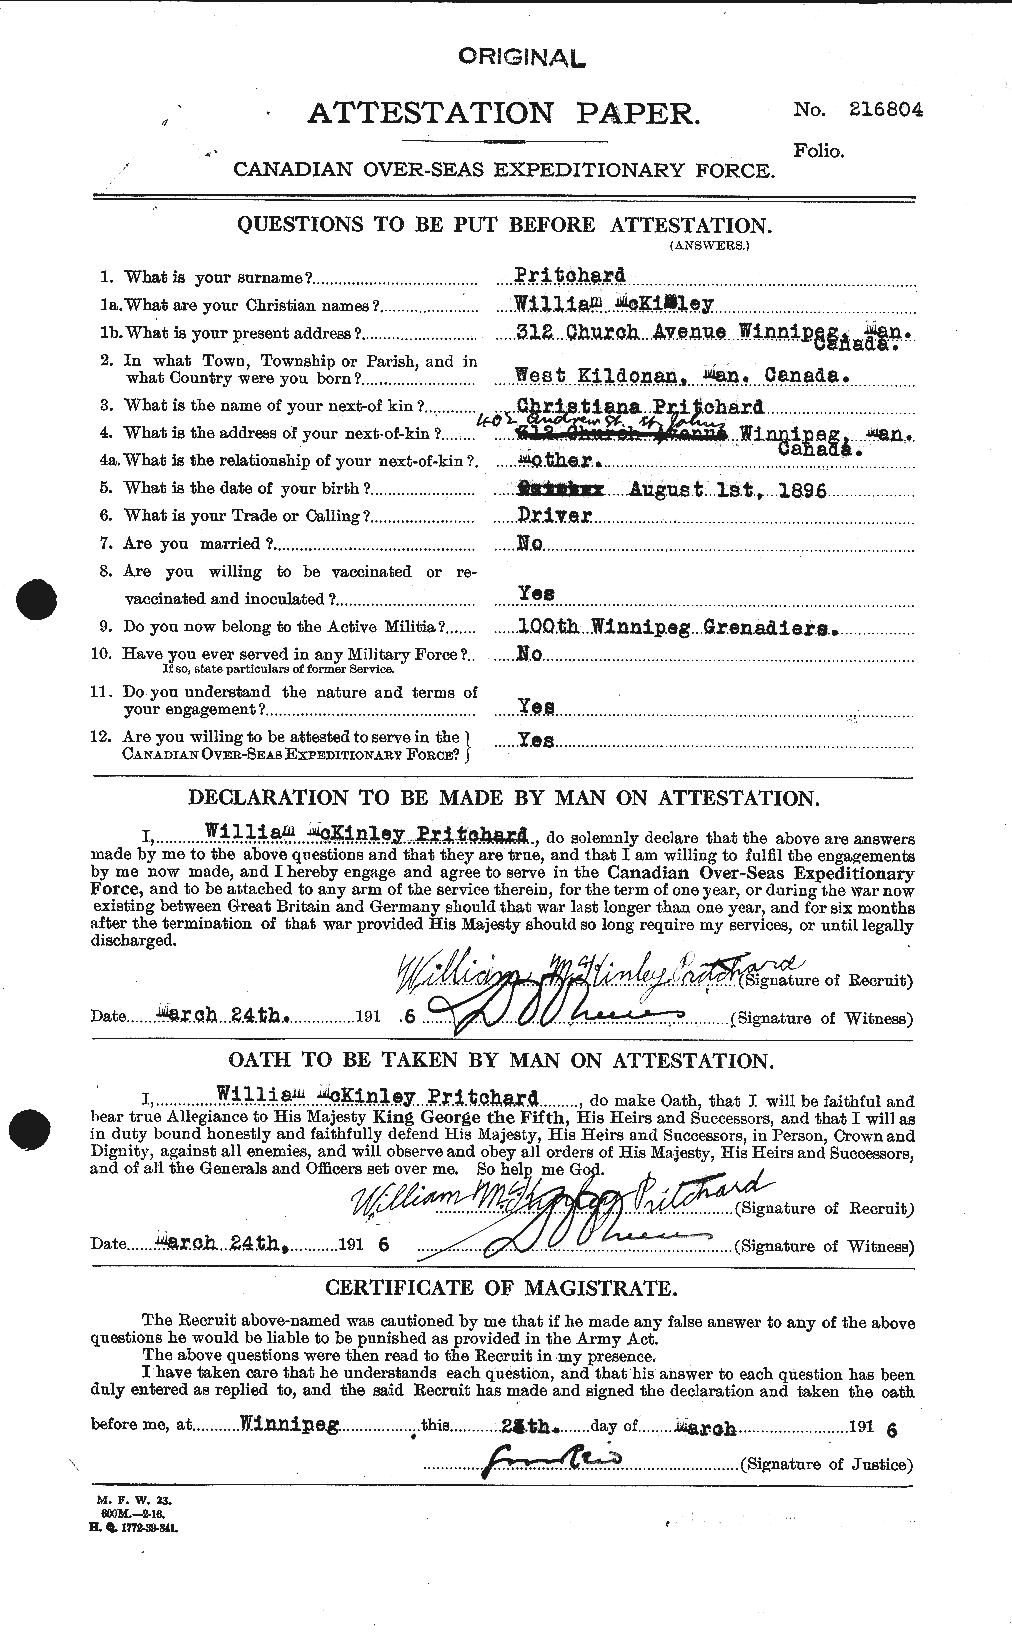 Personnel Records of the First World War - CEF 588632a